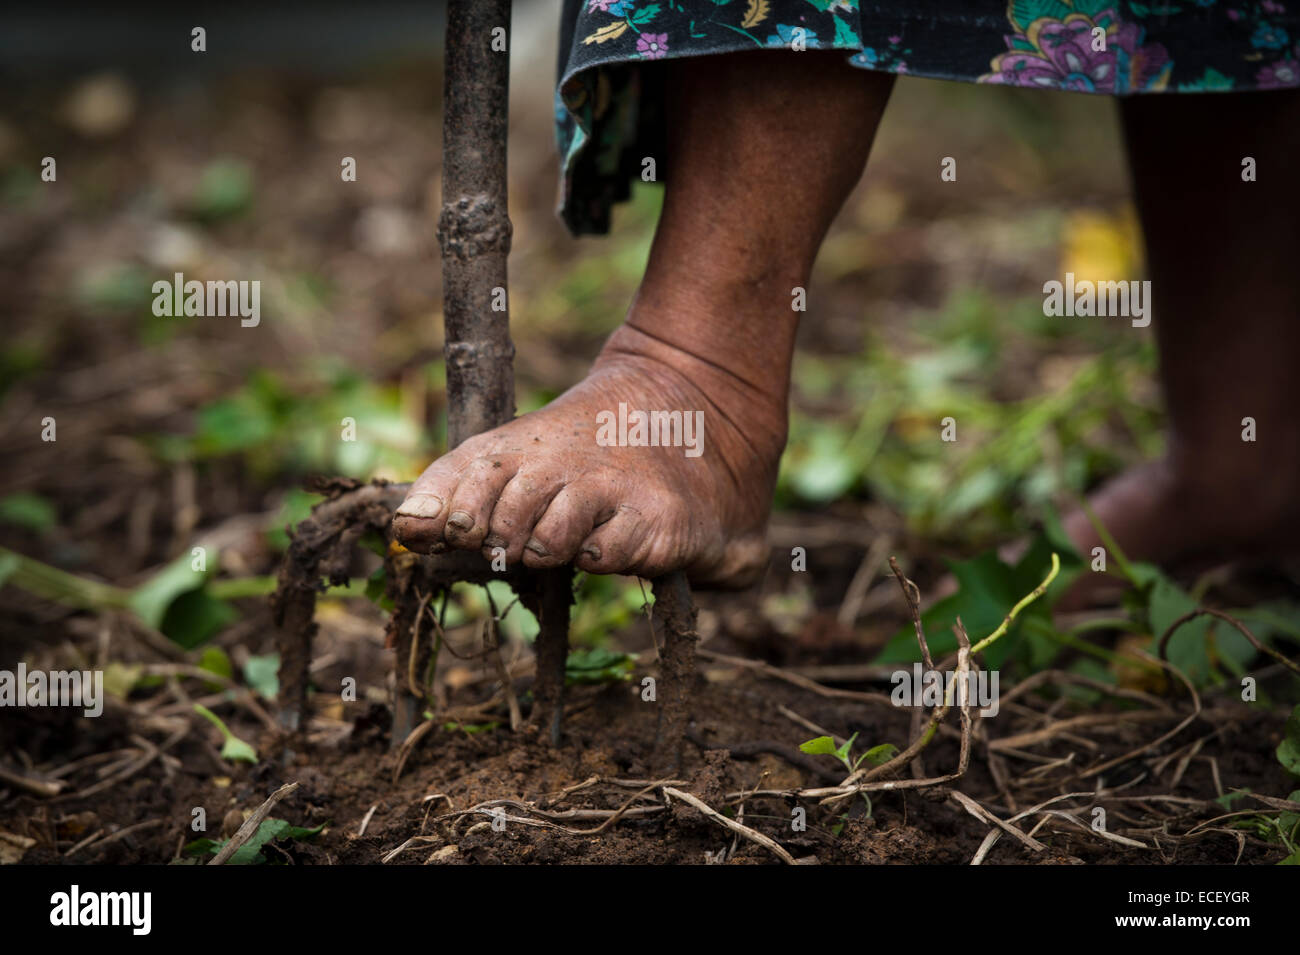 Barefoot in a garden using pitch fork Stock Photo